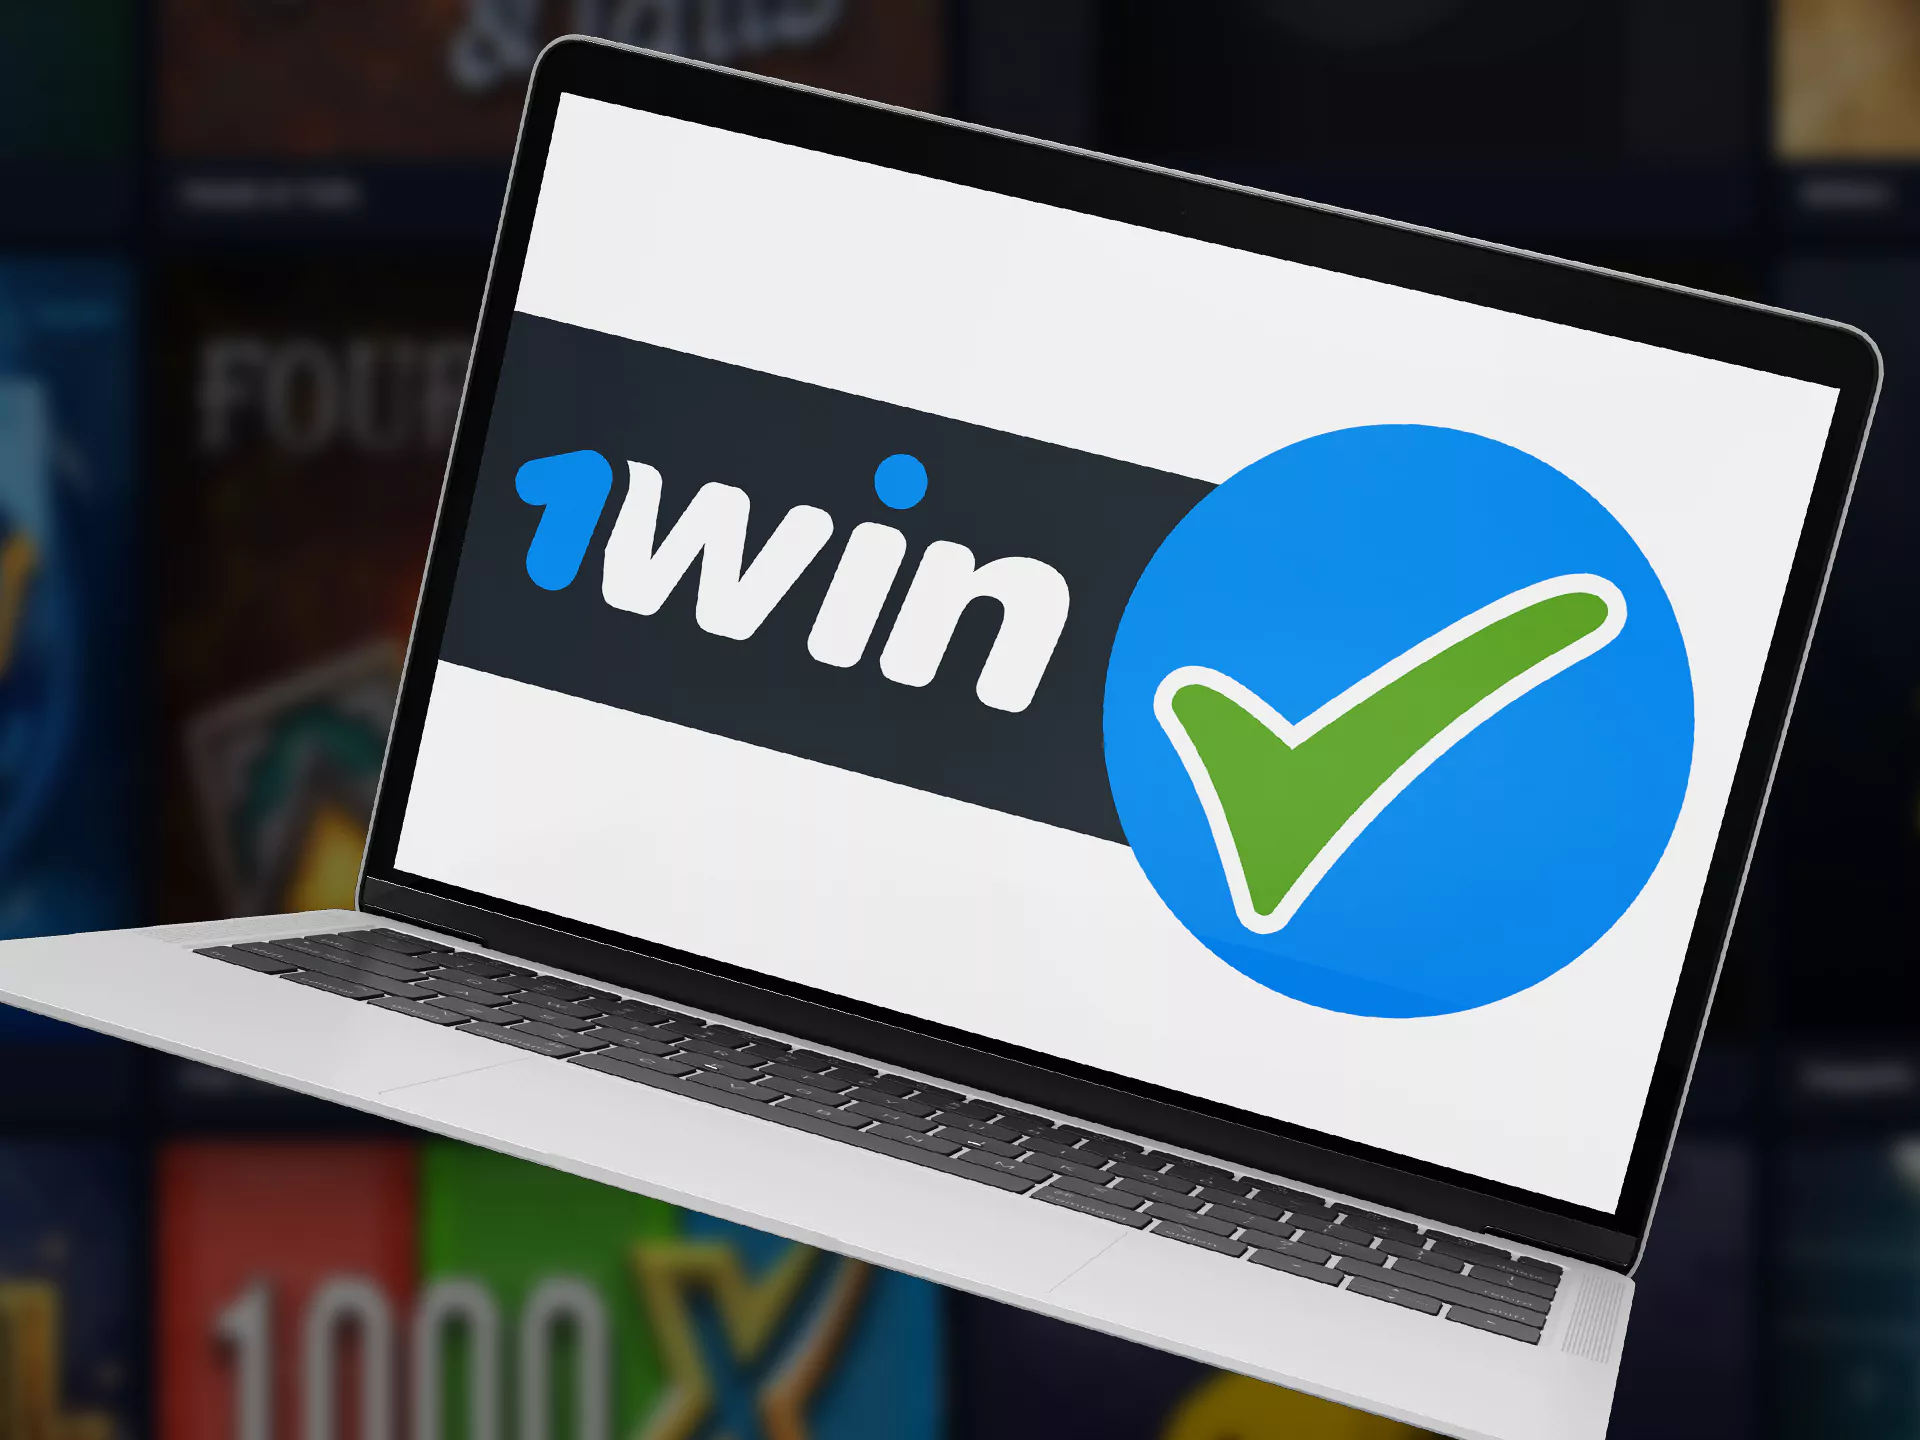 You can start betting after simple verification of your account.